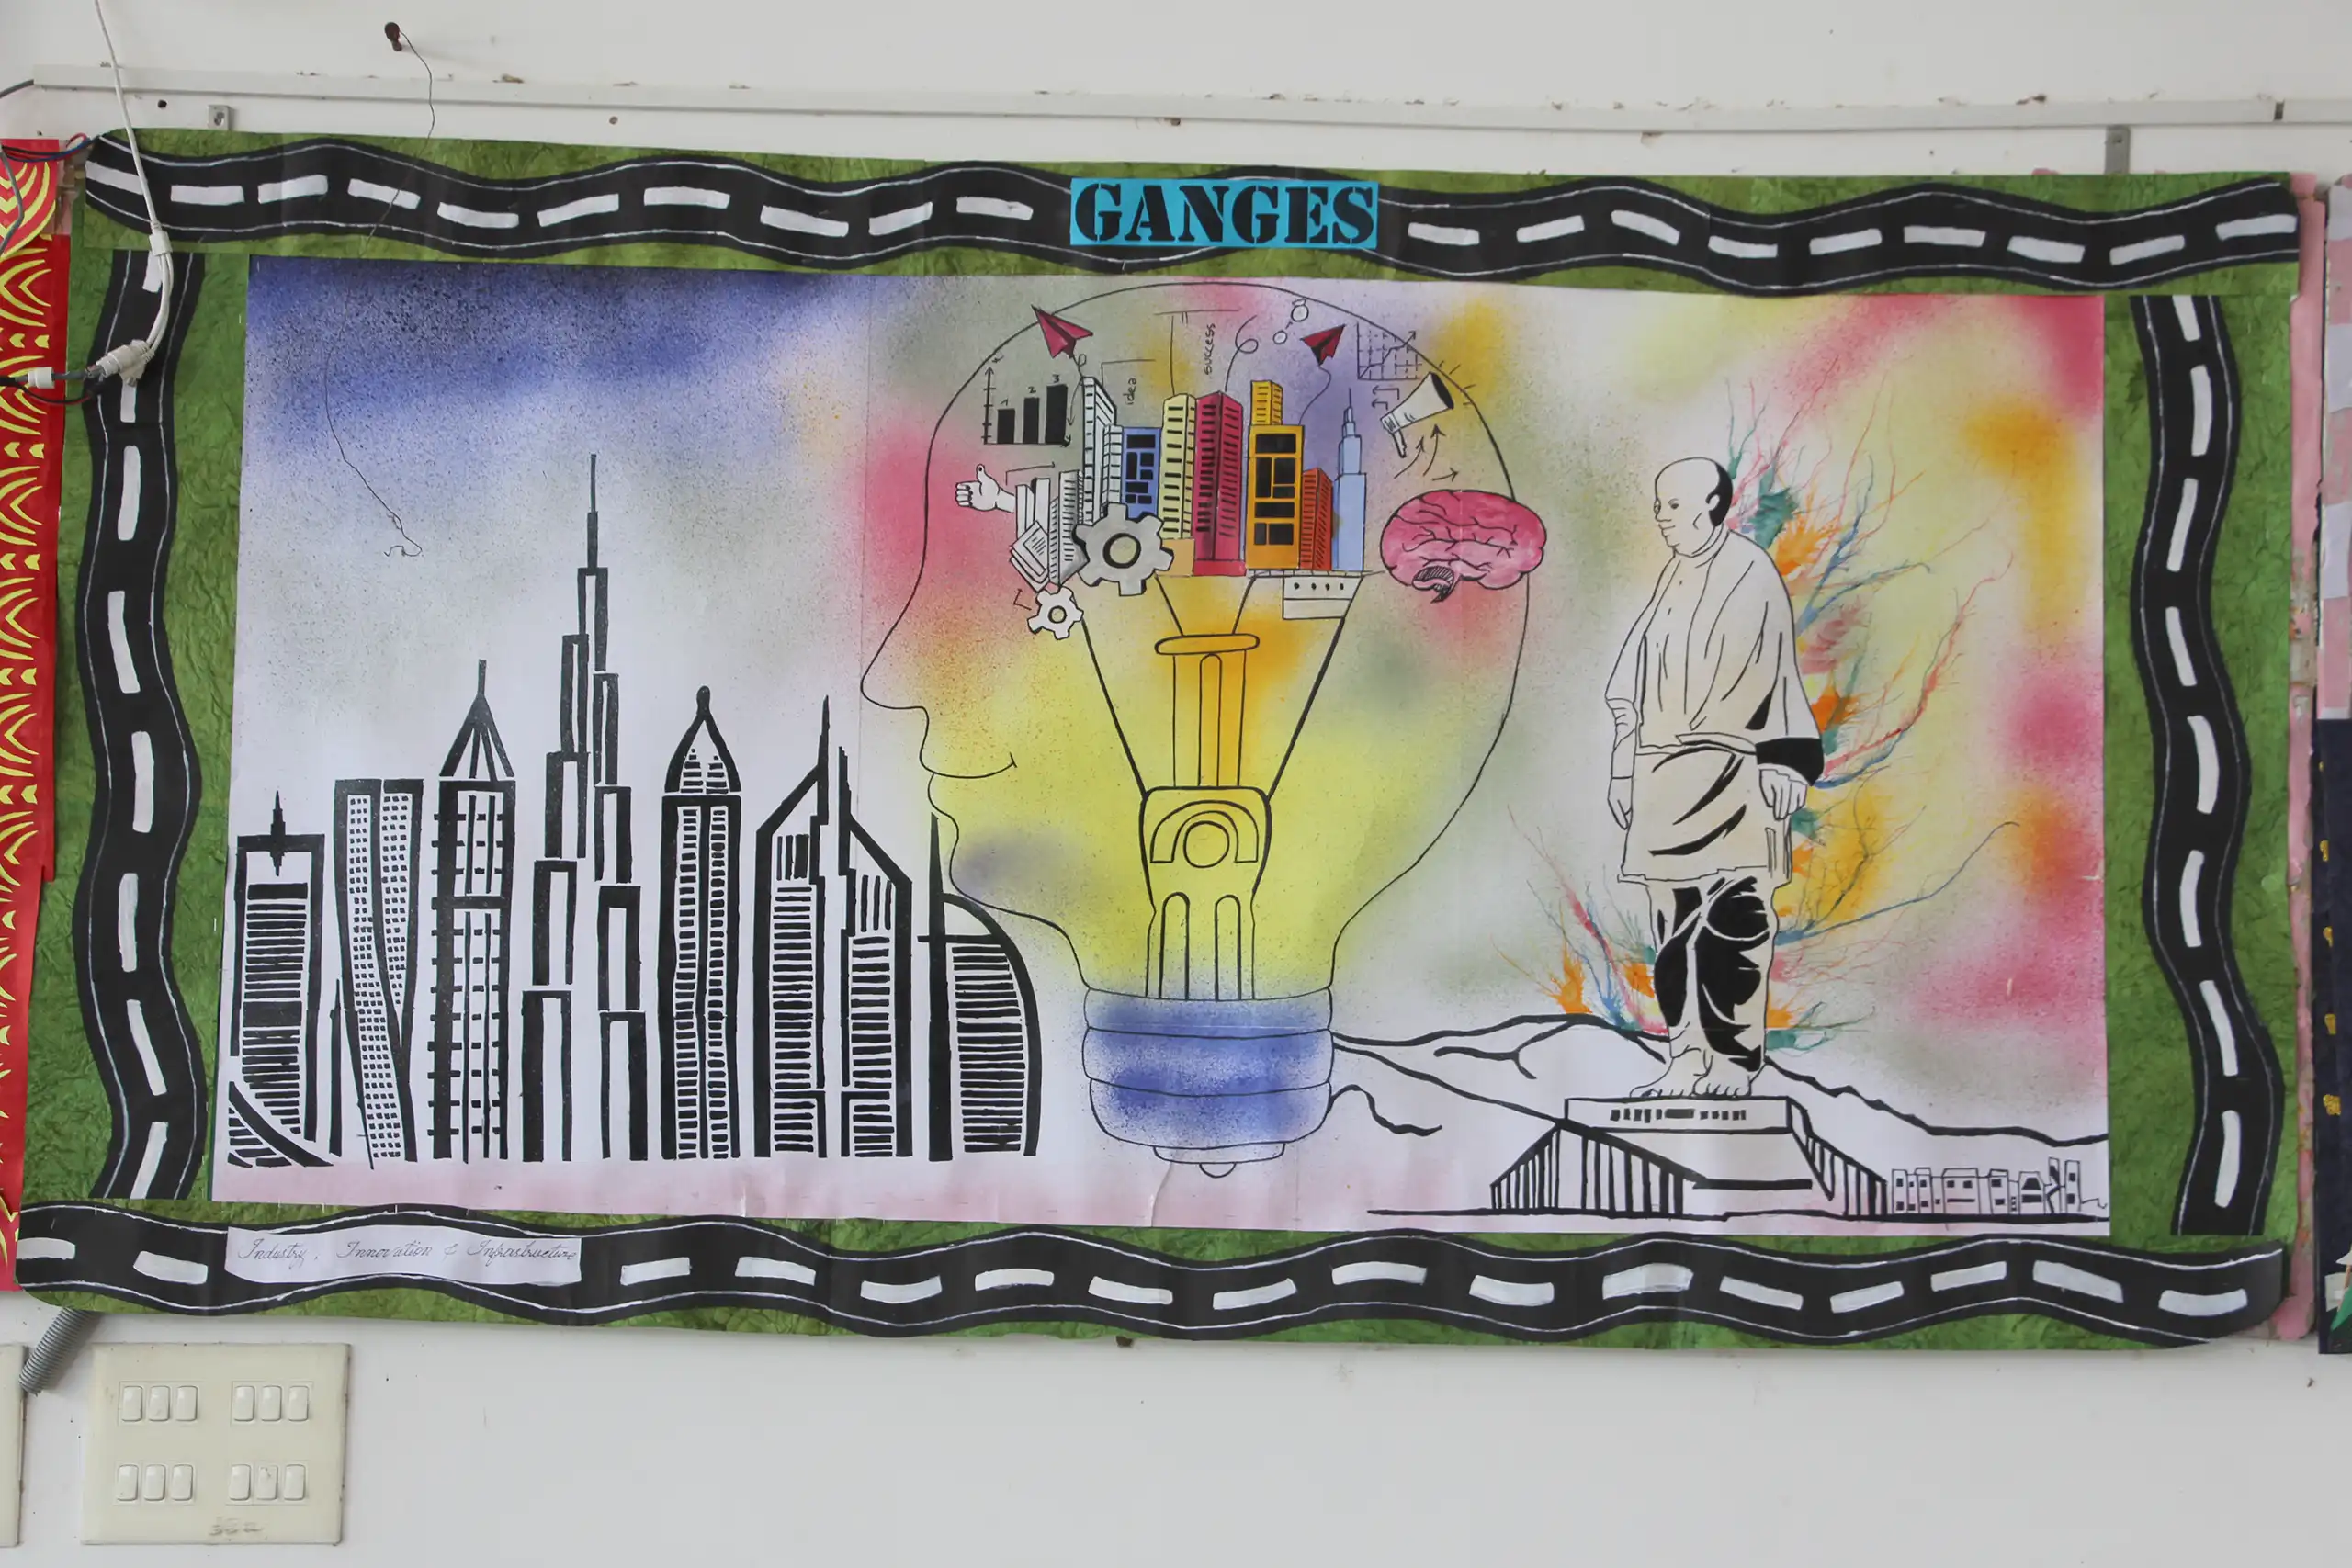 Ganges house decorated bulletin board using creative ideas during House-Wise Bulletin Board Competition.